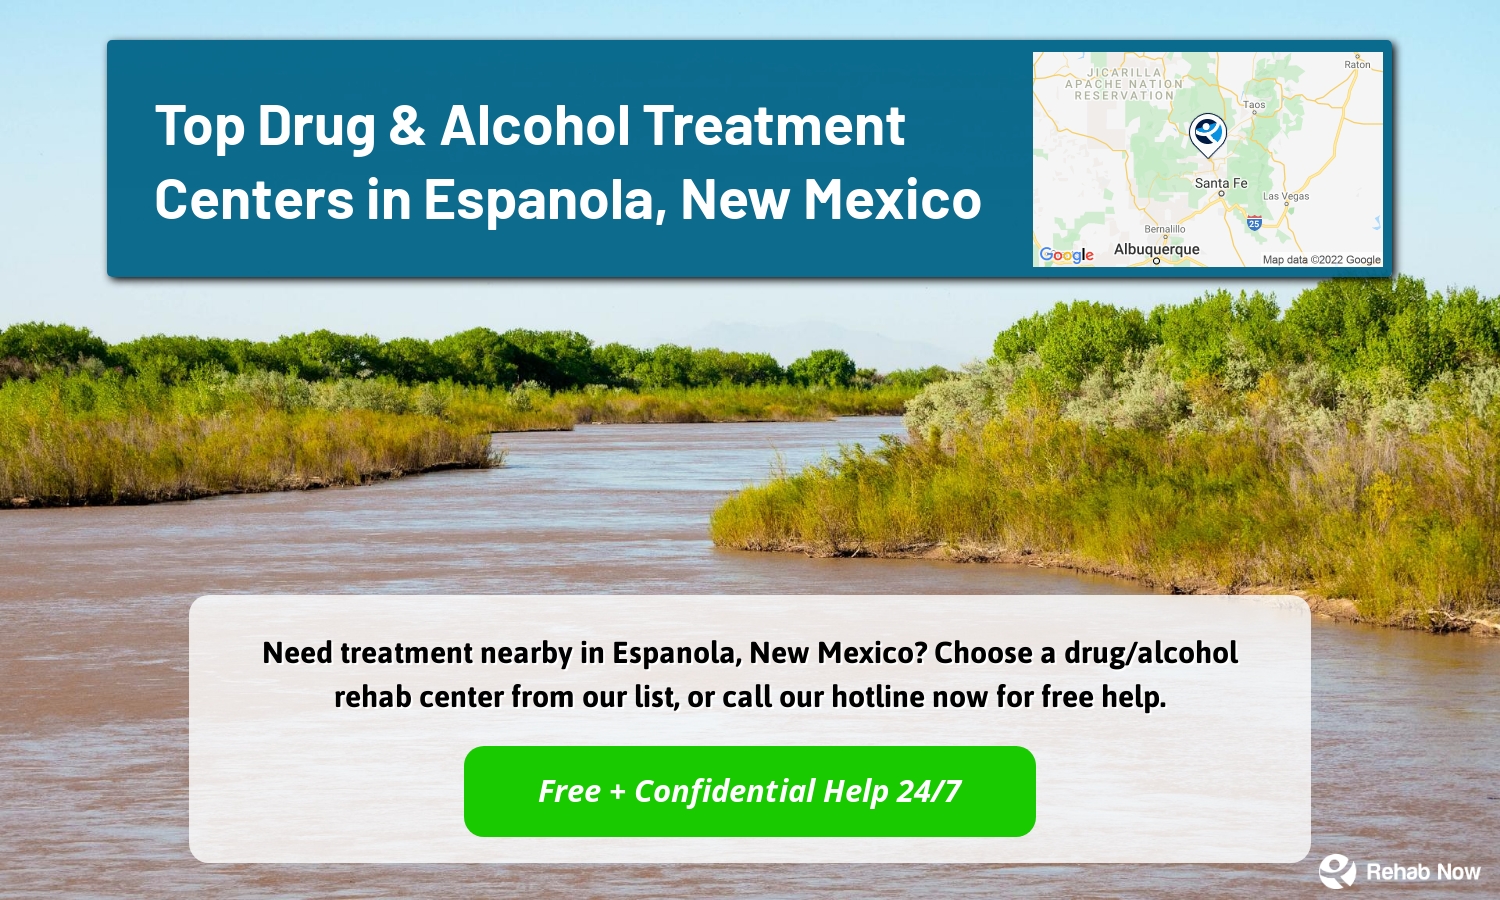 Need treatment nearby in Espanola, New Mexico? Choose a drug/alcohol rehab center from our list, or call our hotline now for free help.